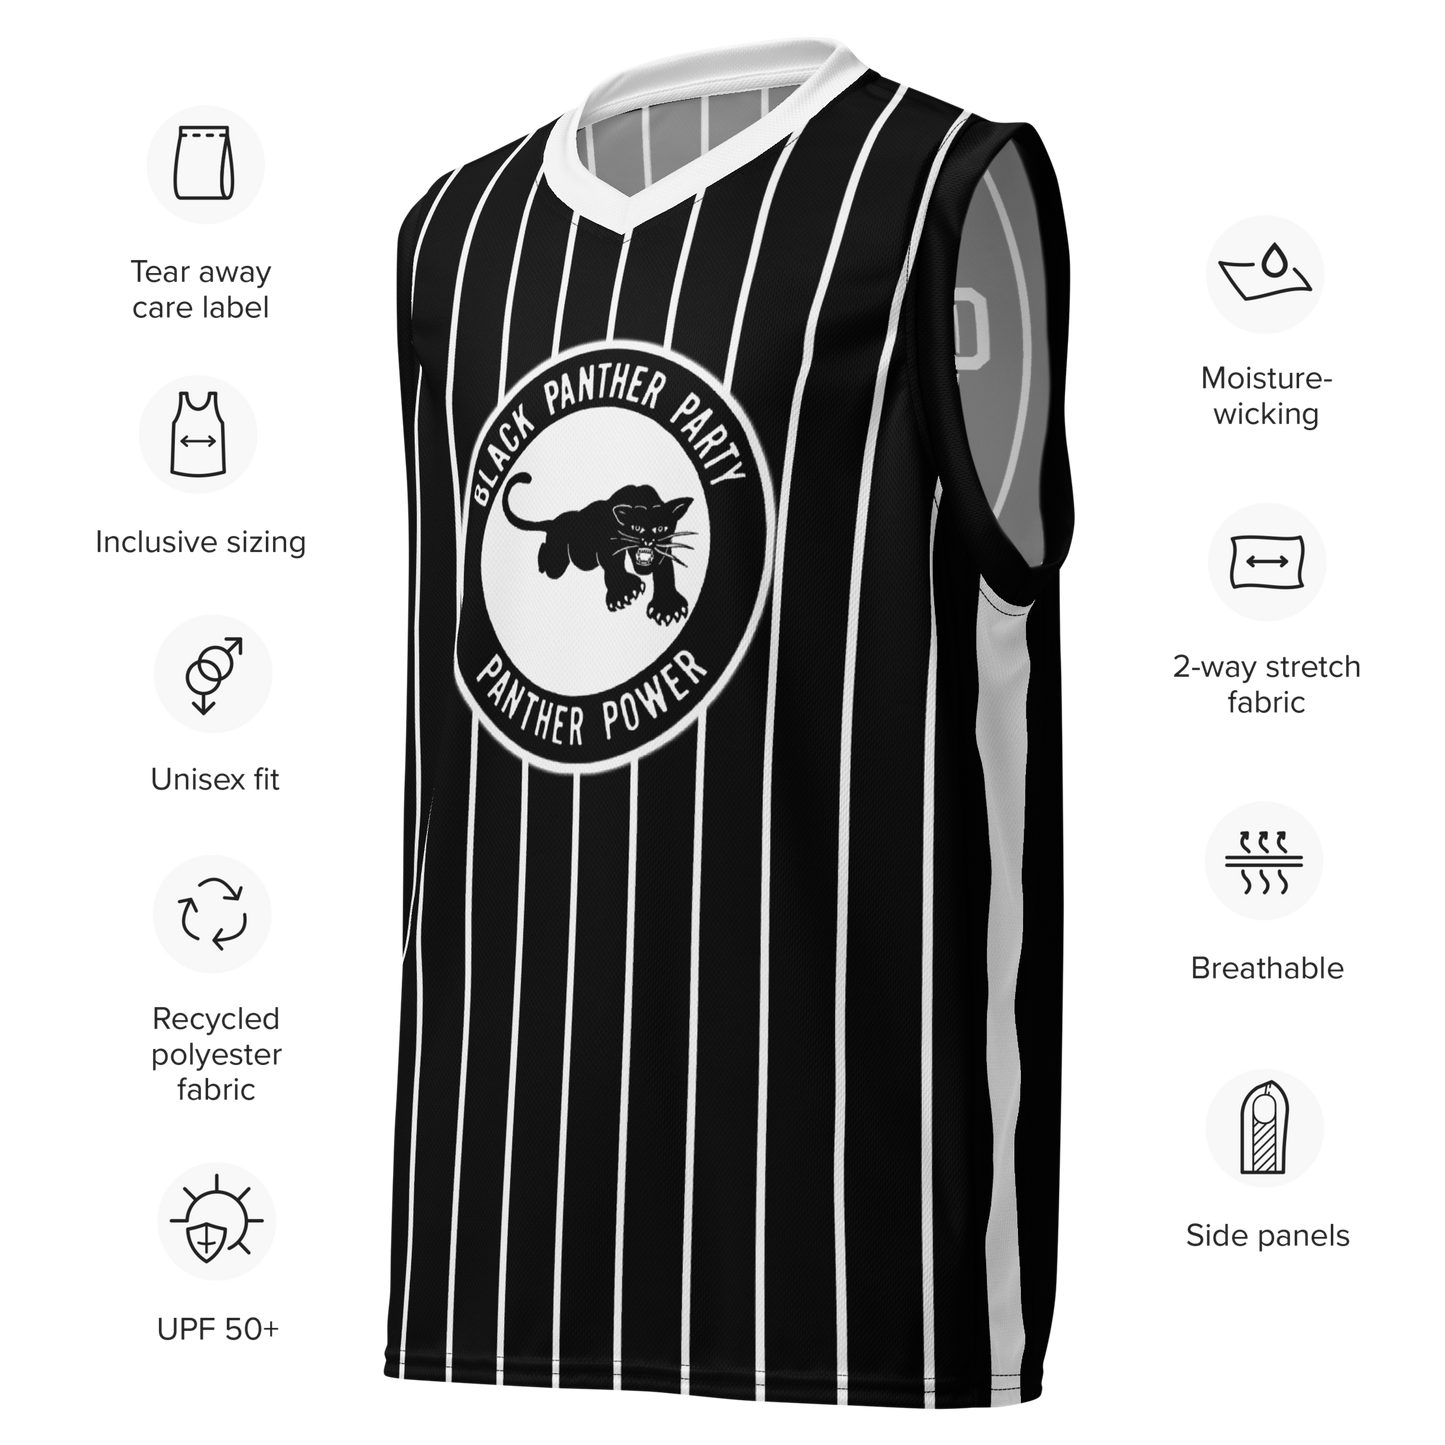 Black Panther Party Recycled Basketball Jersey